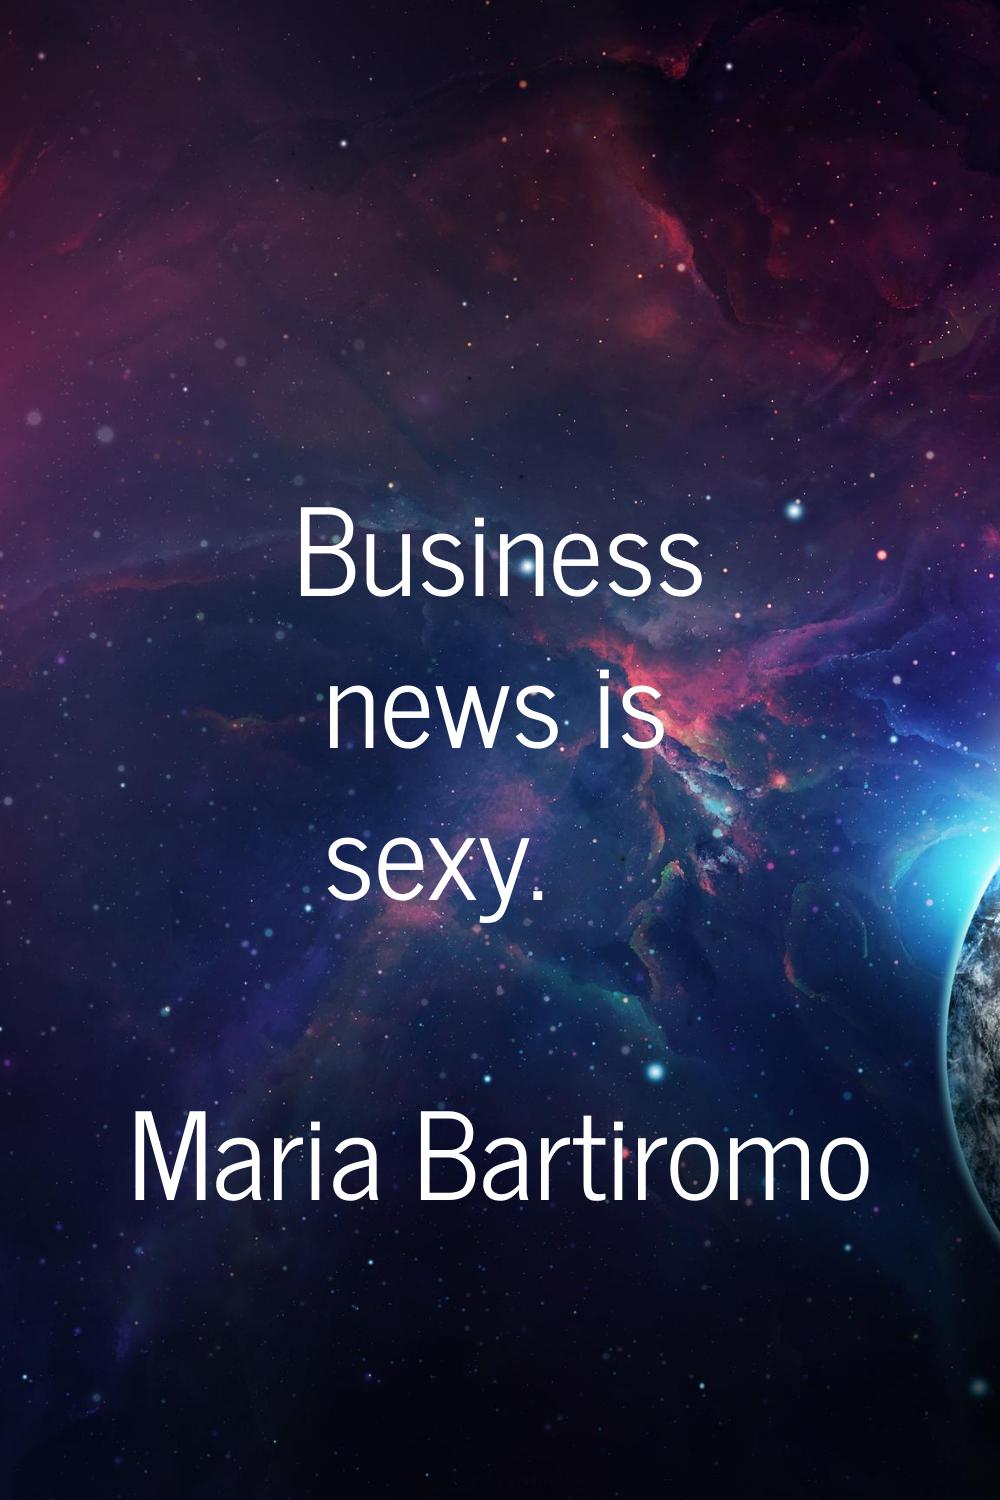 Business news is sexy.